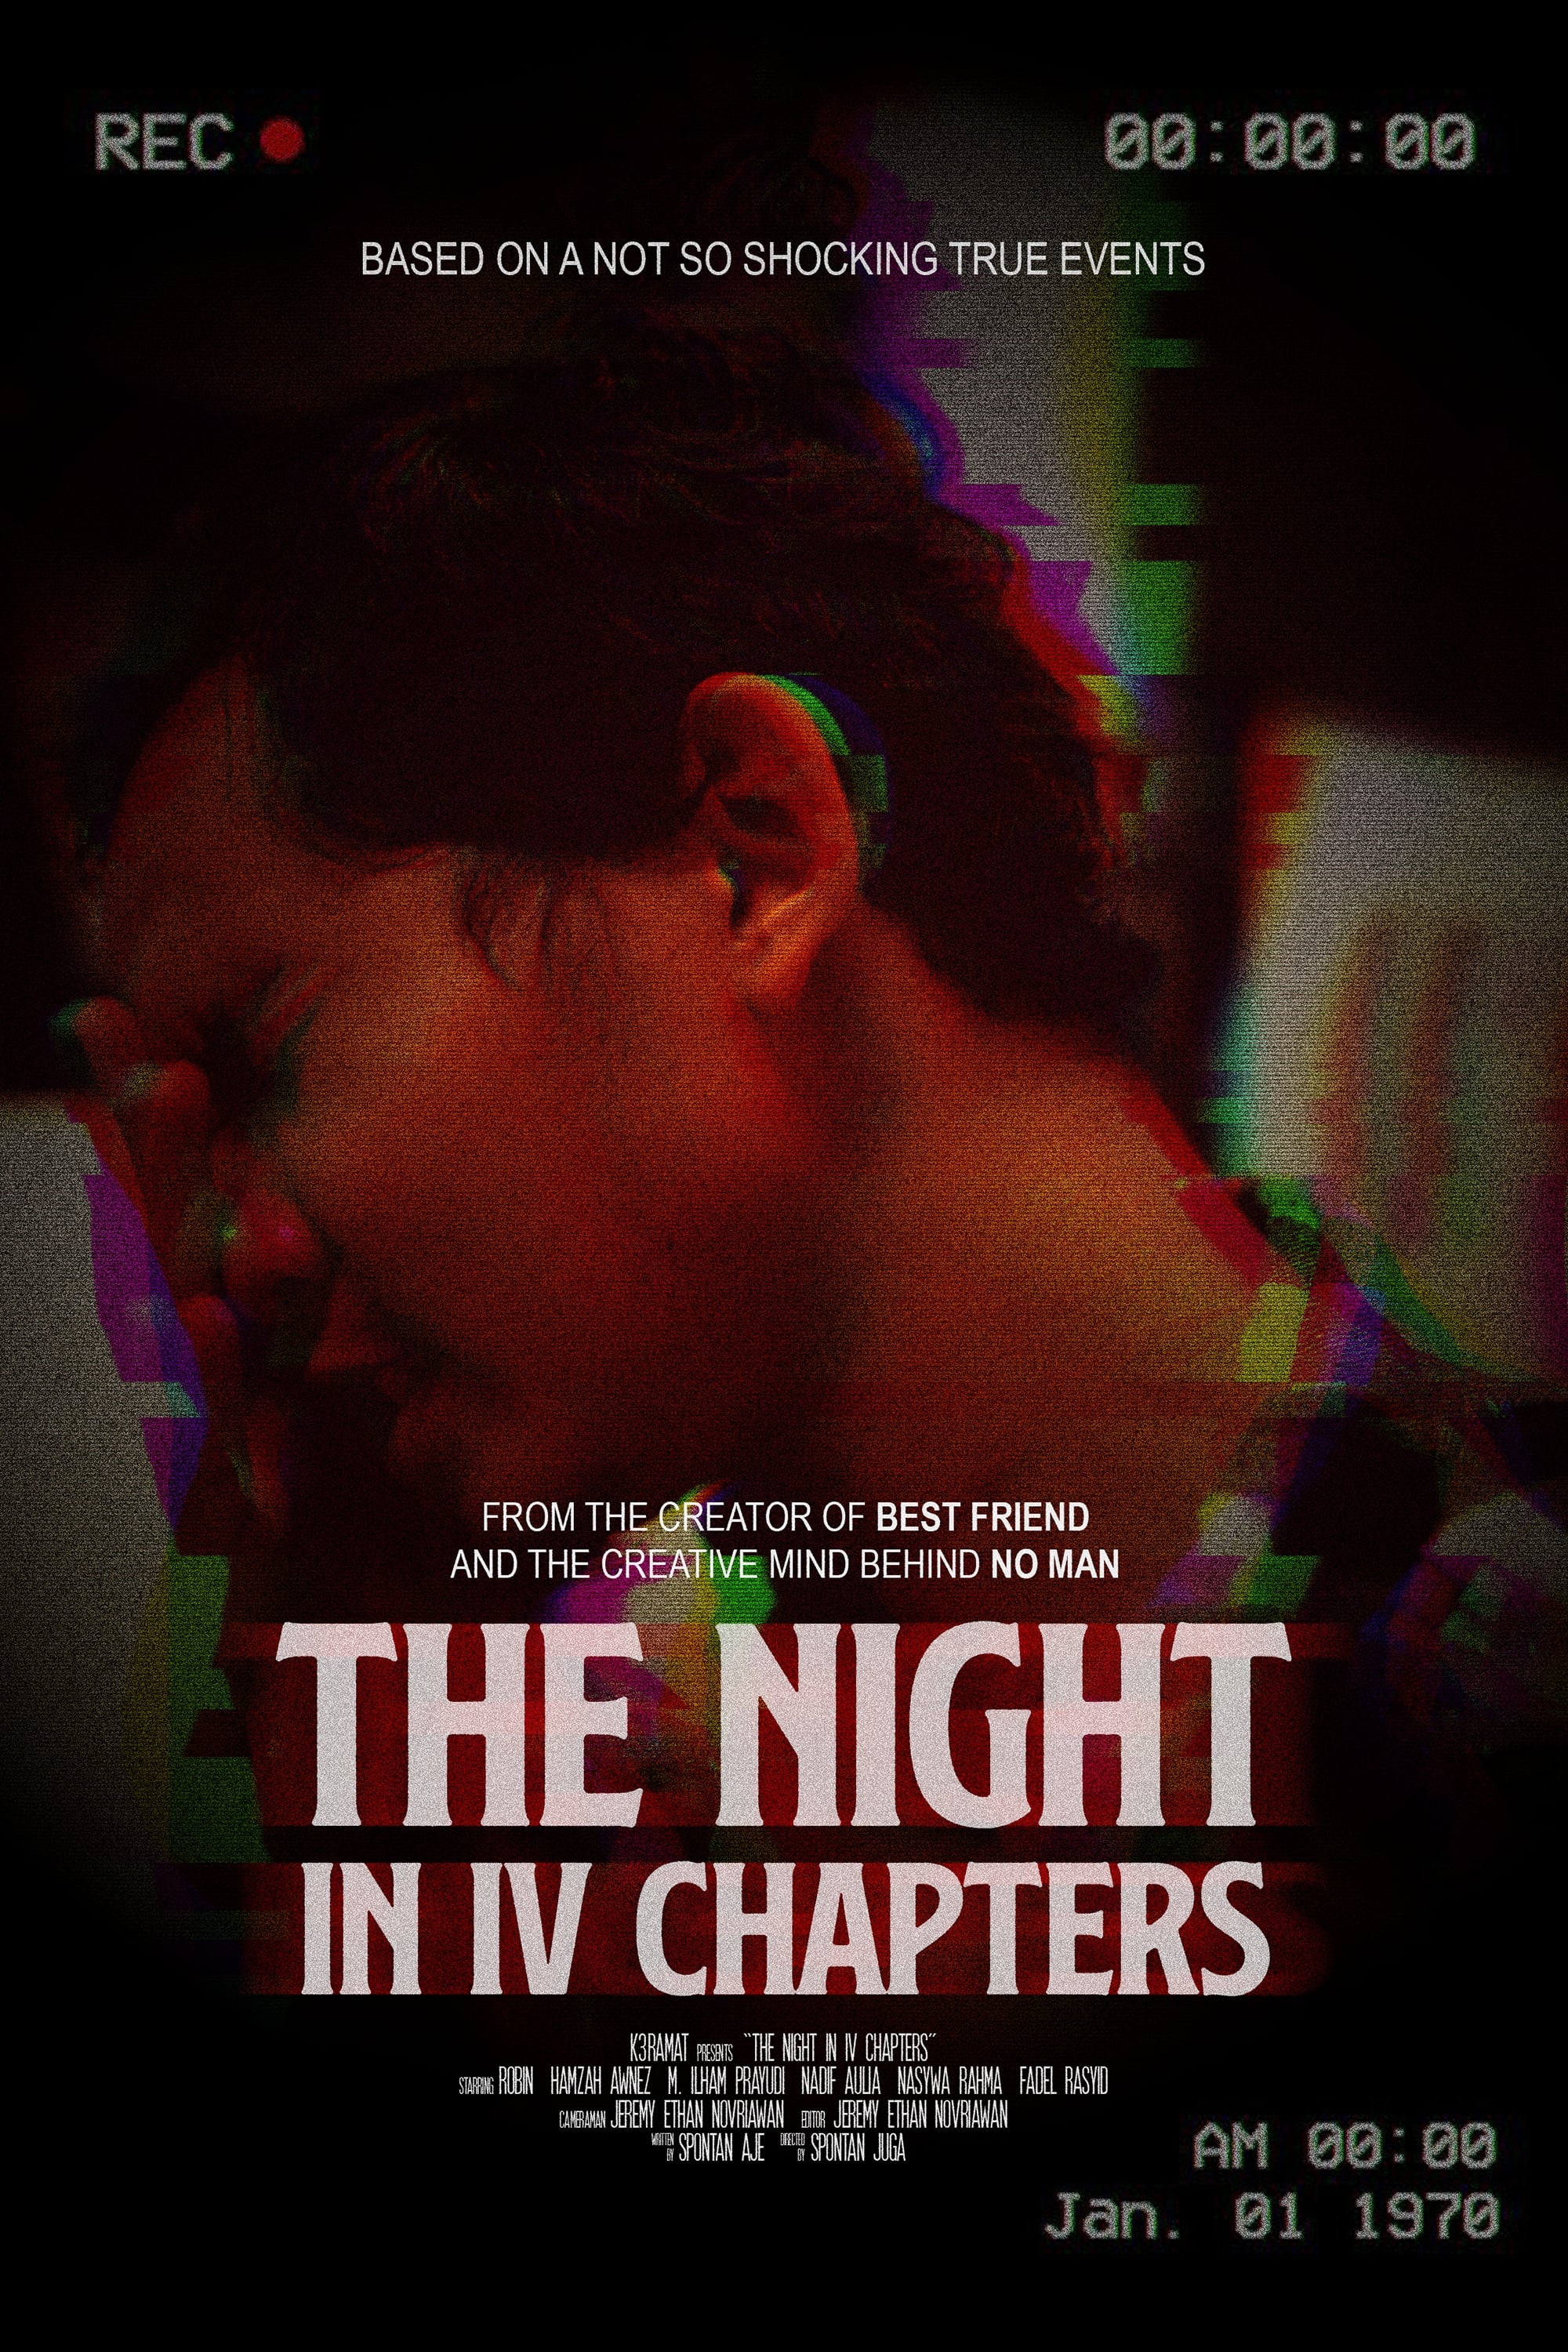 The Night in IV Chapters